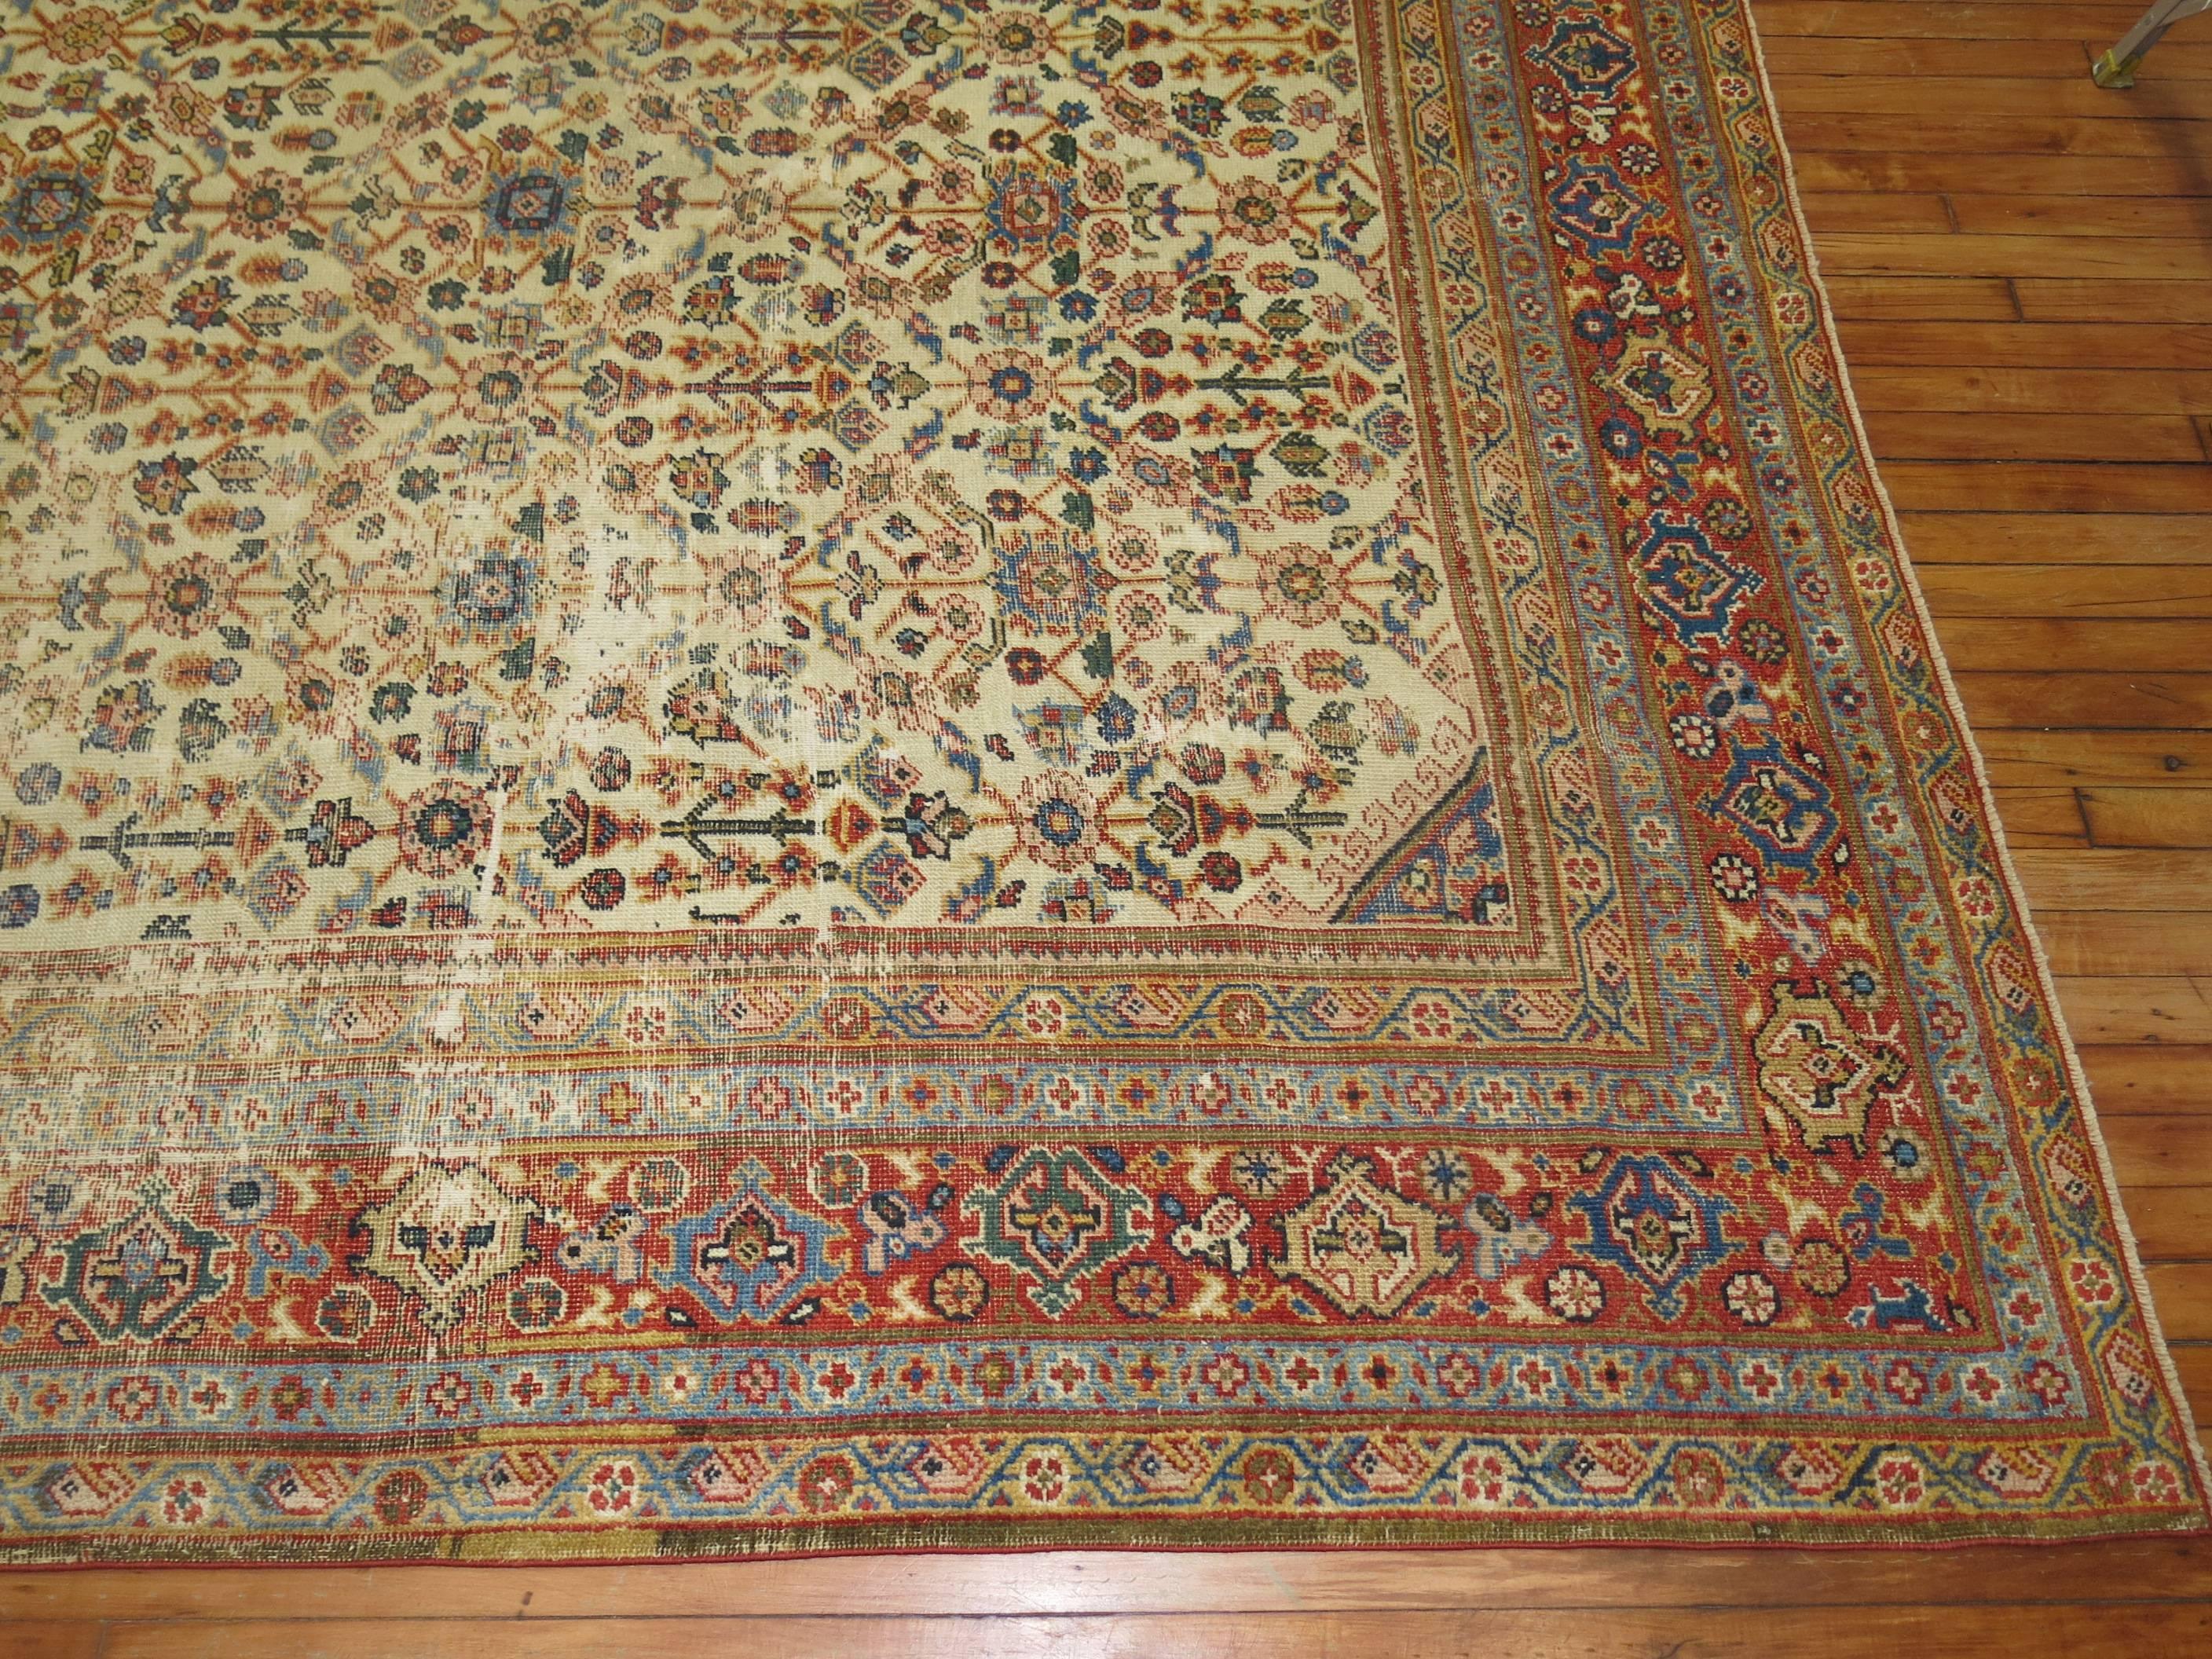 Hand-Knotted Worn Persian Room Size Oriental Early 20th Century Rug